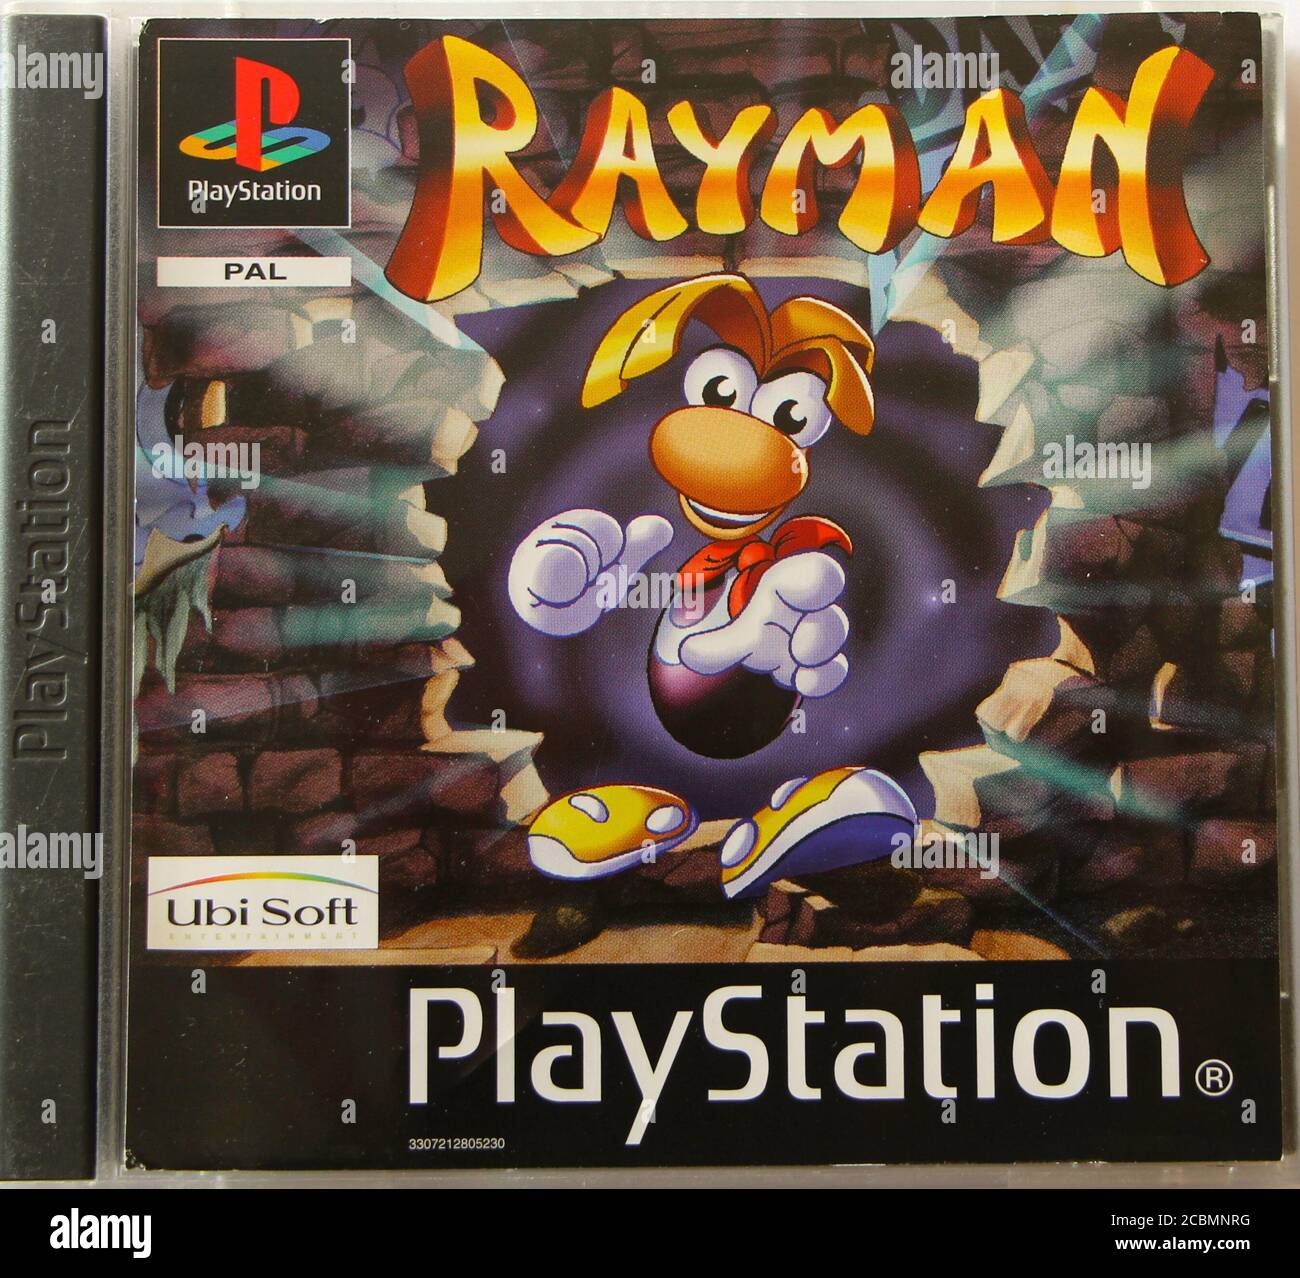 Photo of an Original Playstation 1 CD box and cover for Rayman the original game by Ubisoft Stock Photo